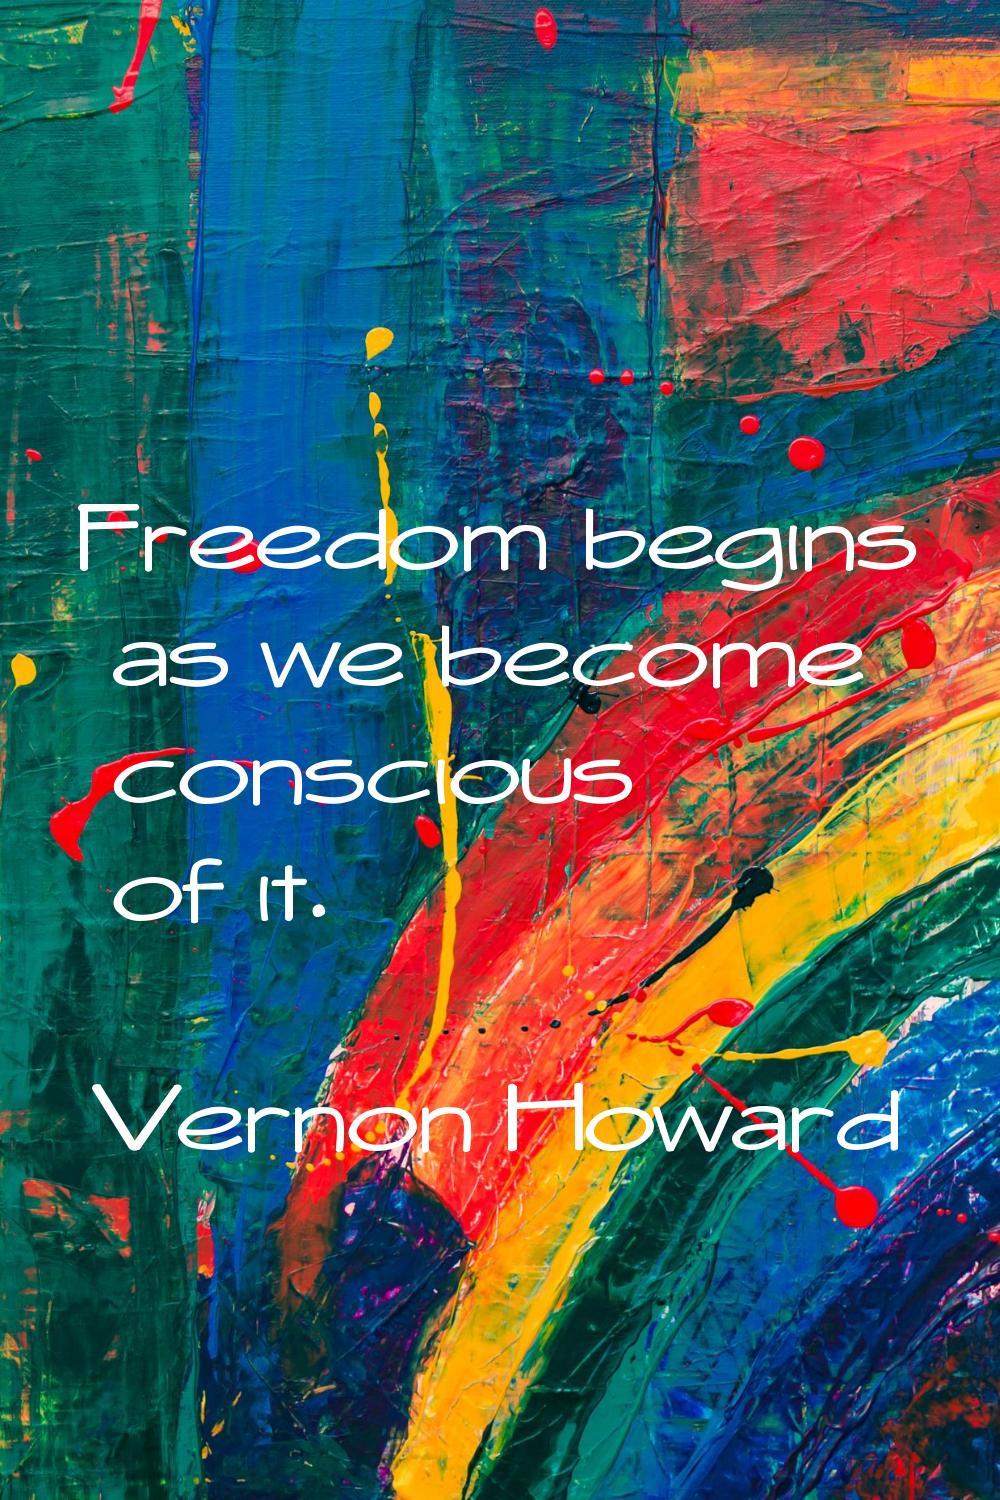 Freedom begins as we become conscious of it.